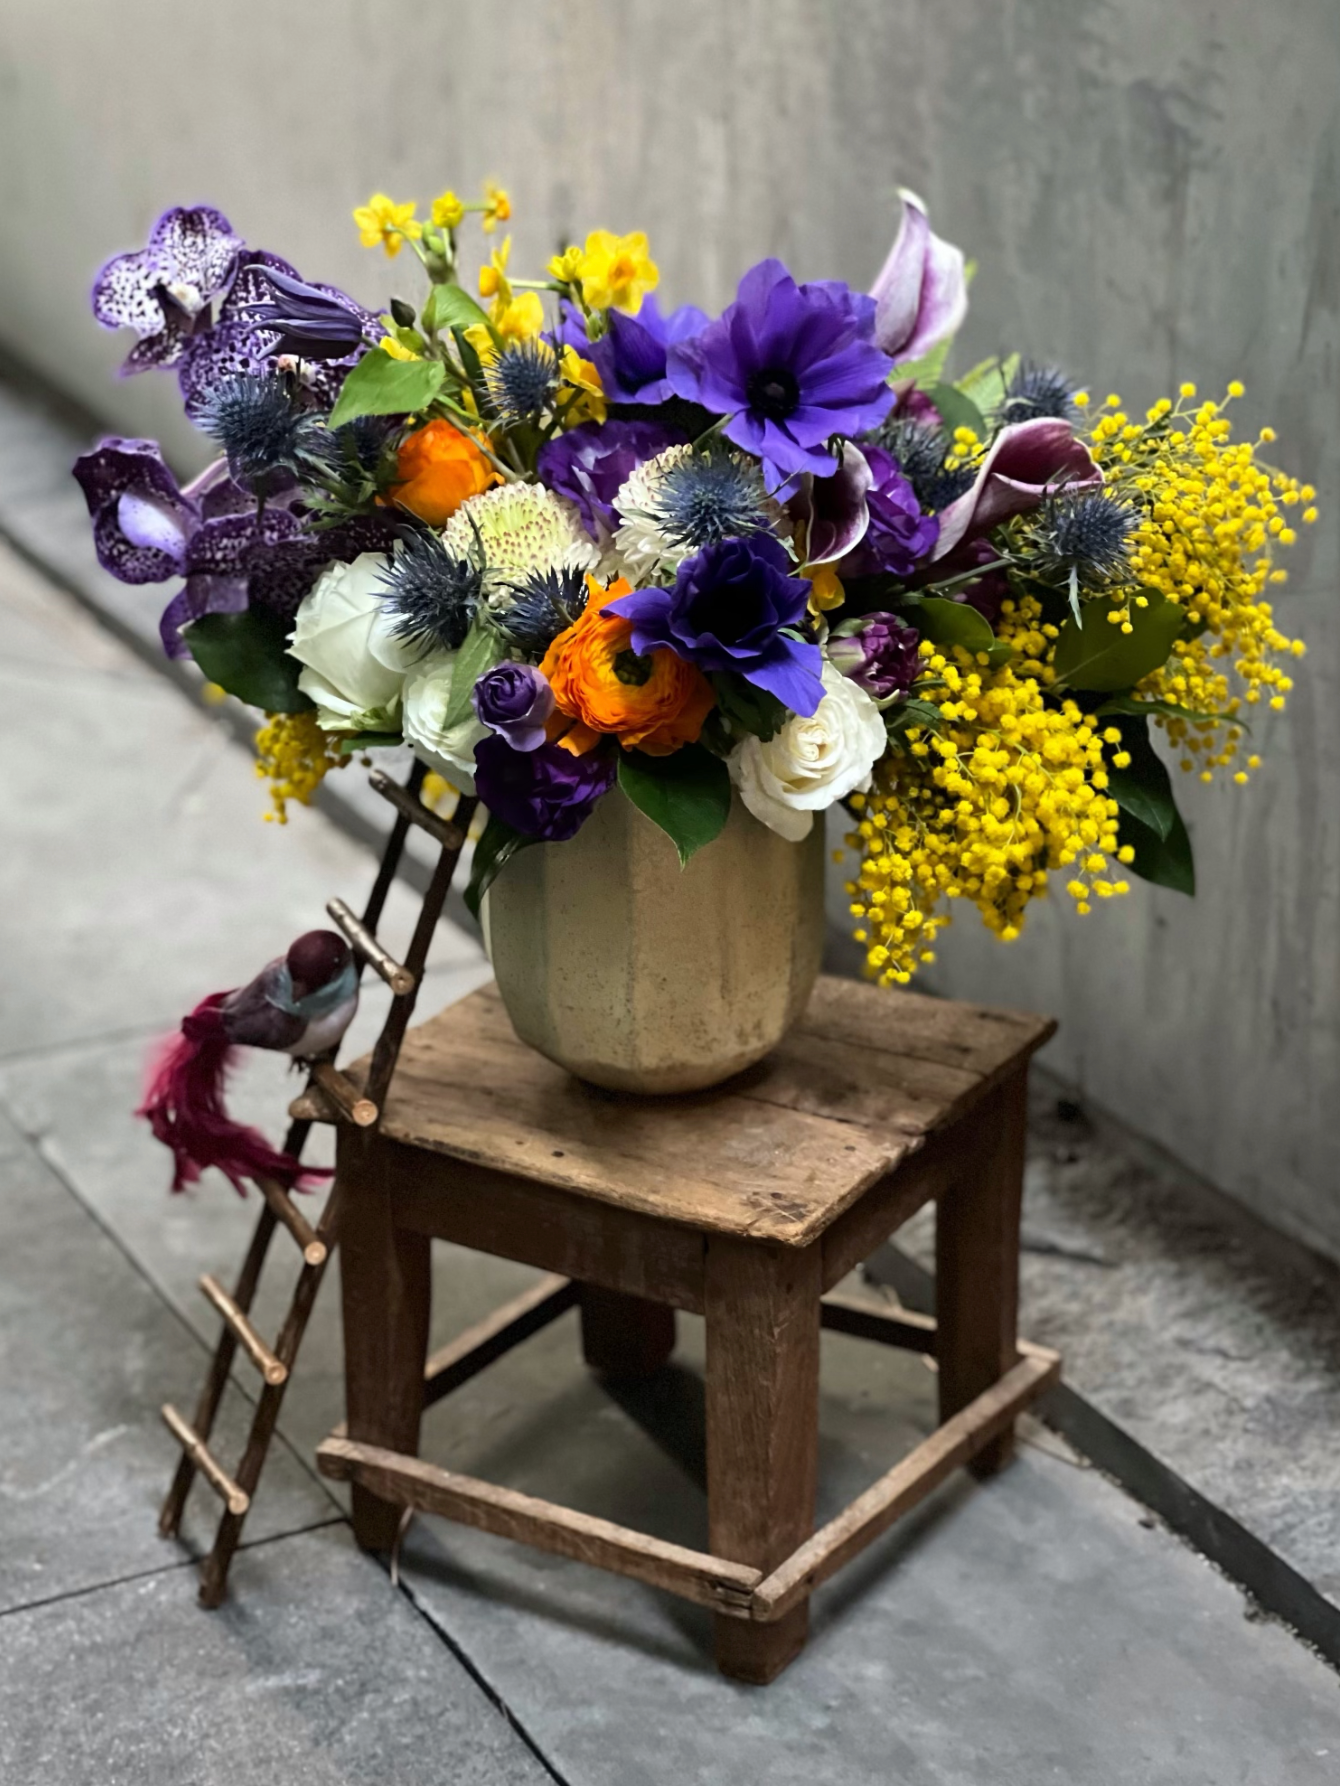 violet poppy anemones, daffodils and orchids make an impressive focal point.